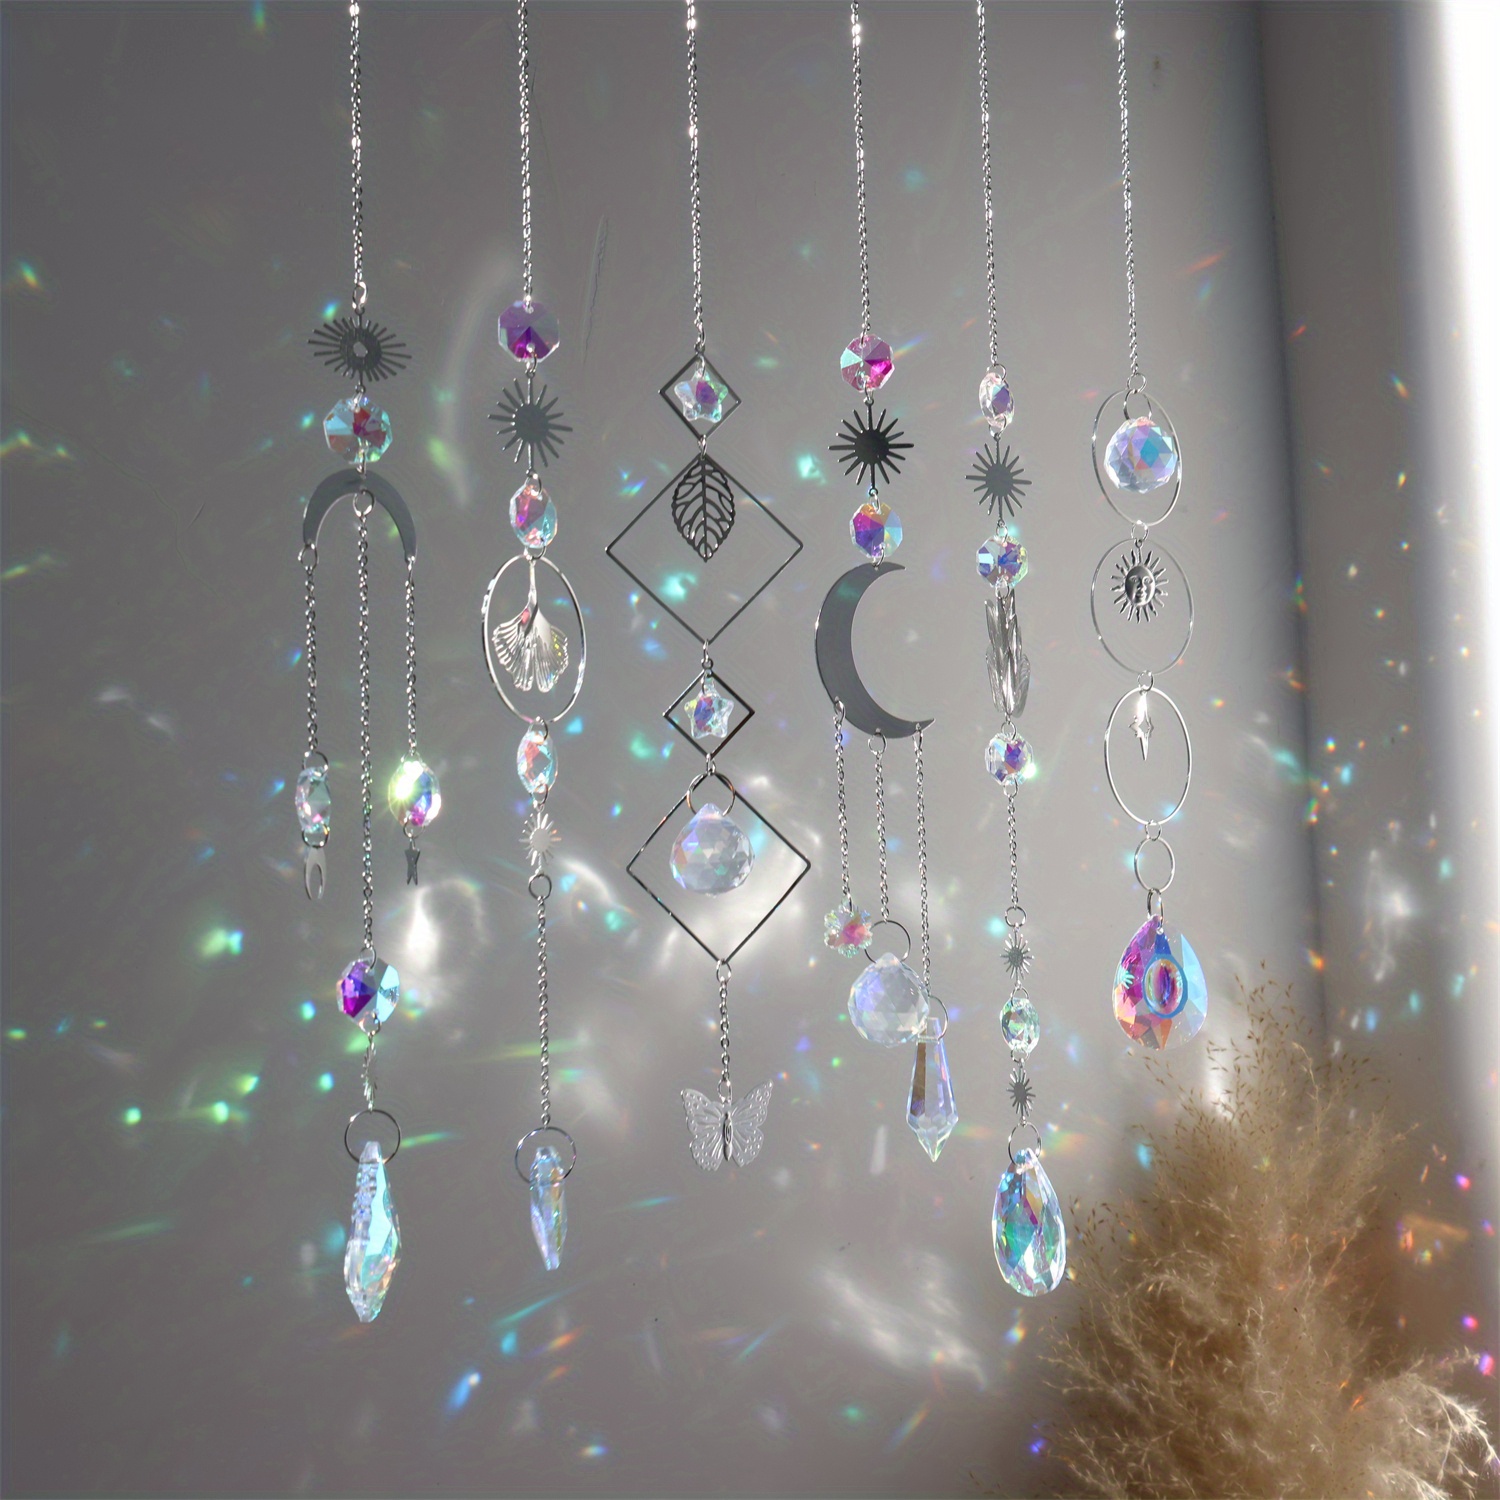 Sun Catchers, 6 Pieces Colorful Suncatchers Decorative Hanging Clear  Crystal Prism Rainbow with Silver Moon Sun Metal Forms Suncatcher Kit for  Window